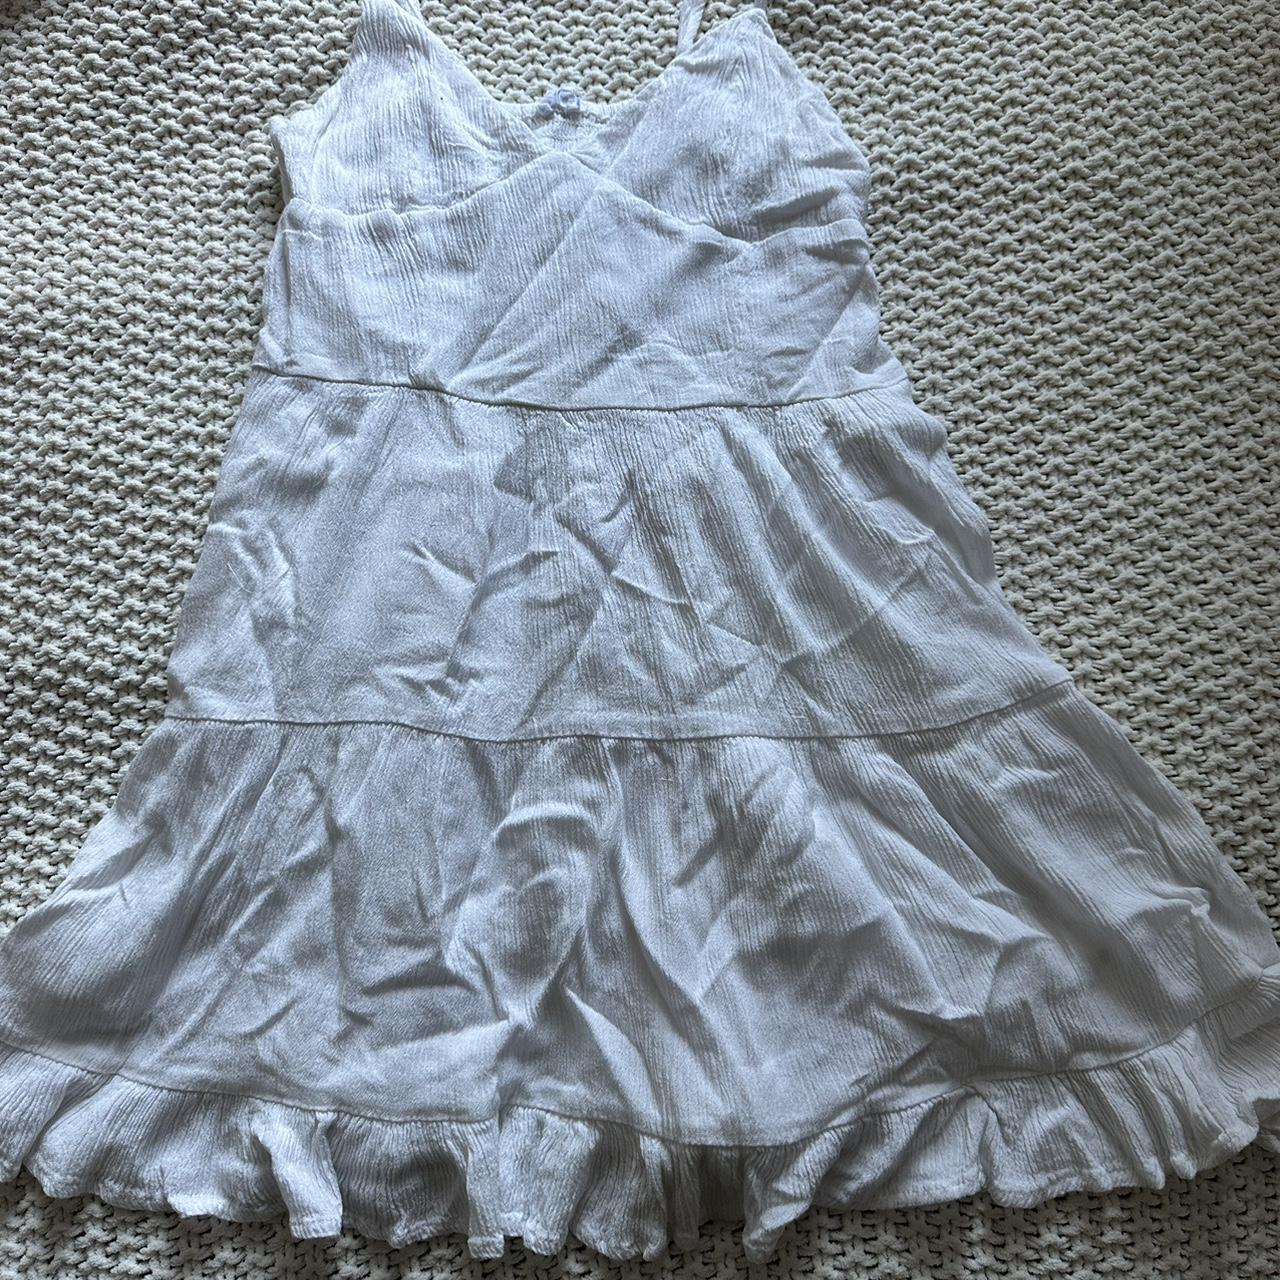 Simple White Dress from Garage size small worn once - Depop